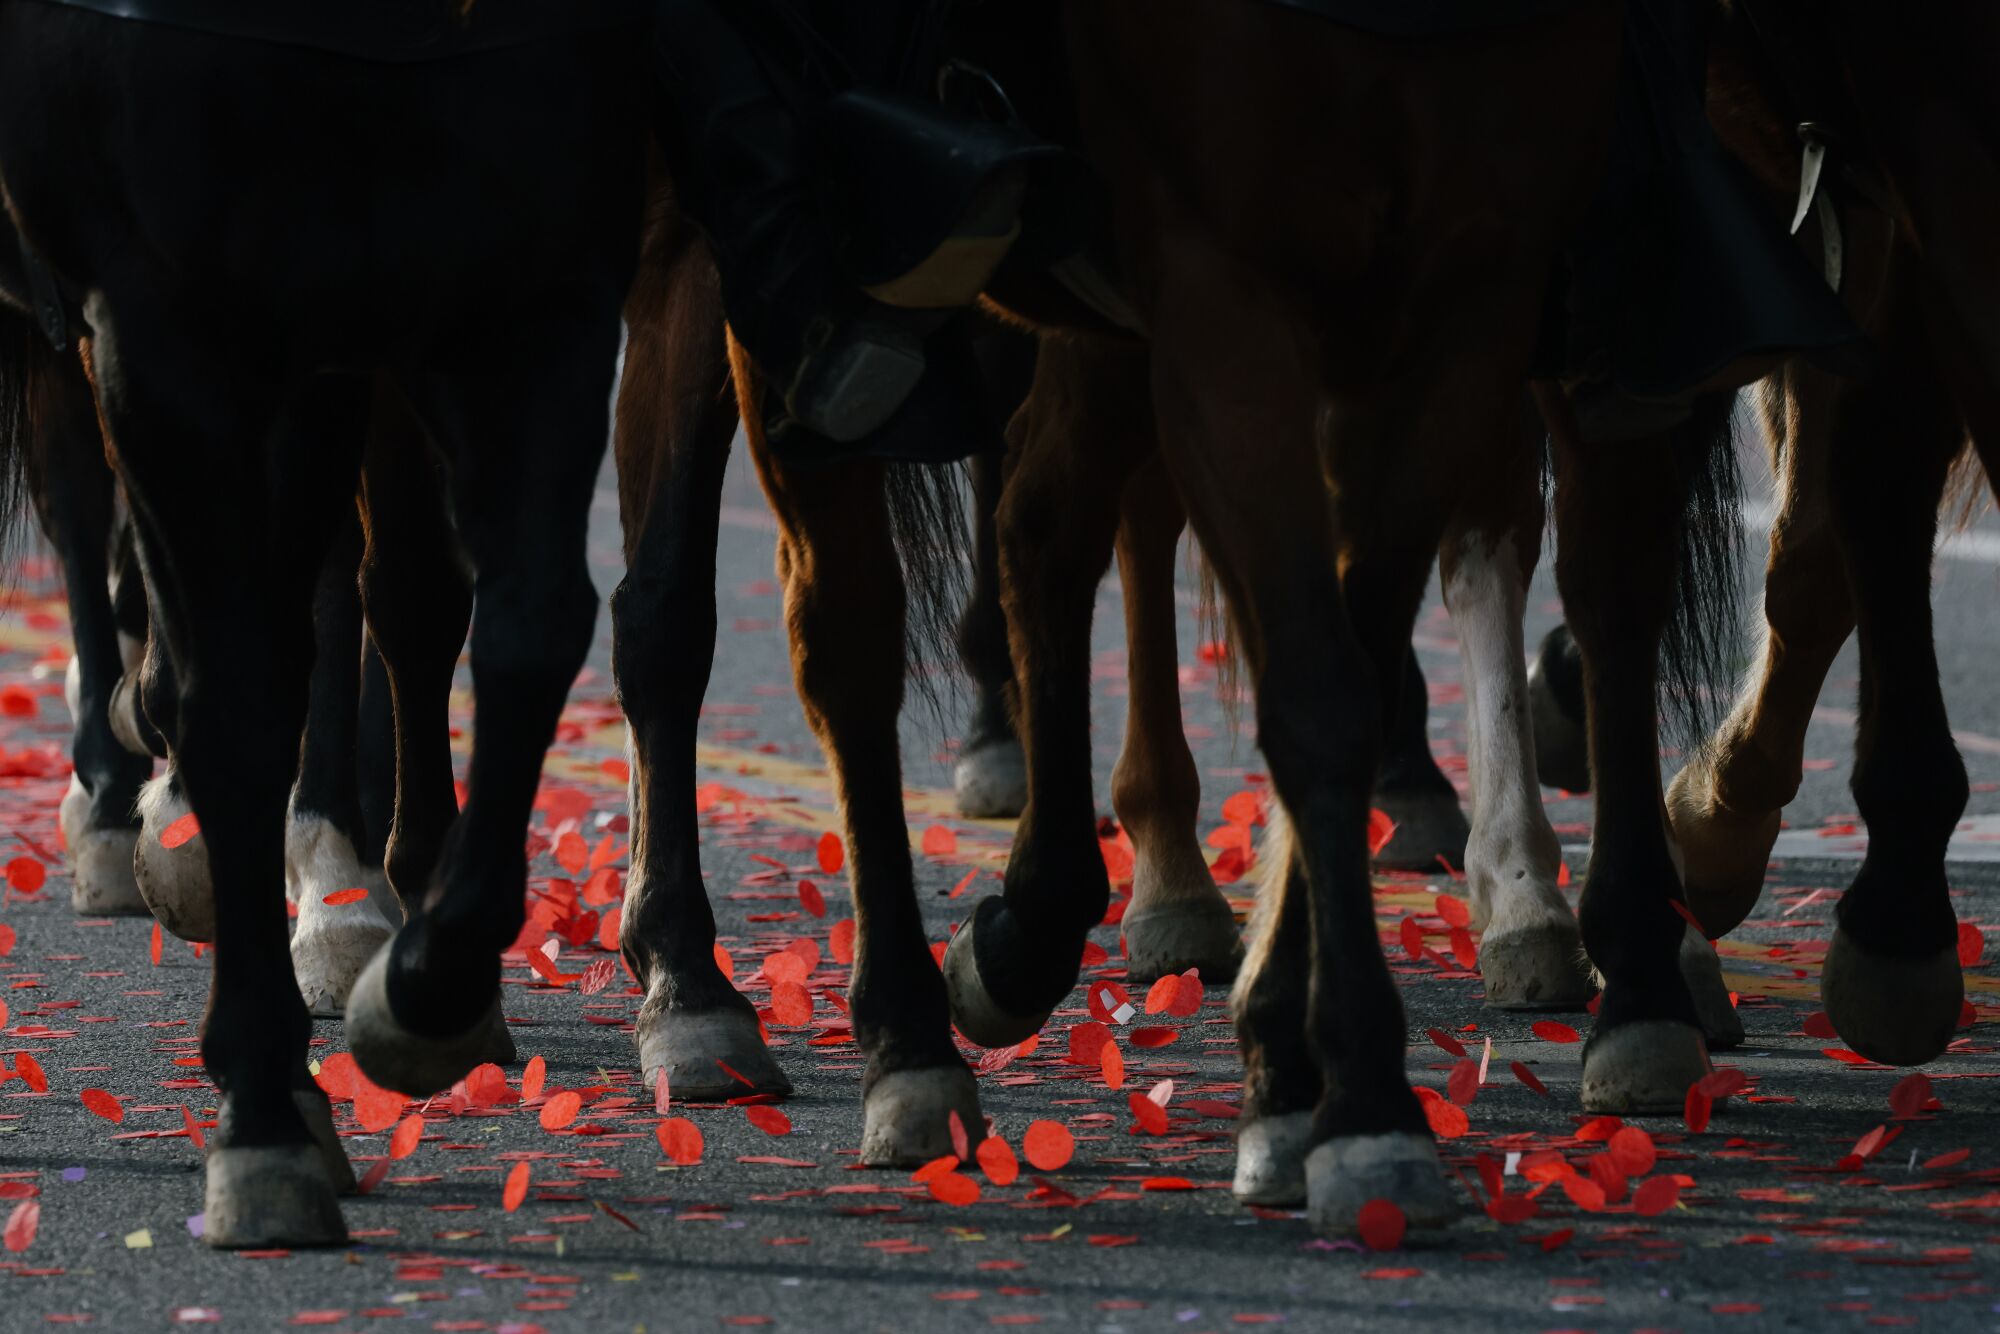 A close-up of horse hooves walking over confetti.